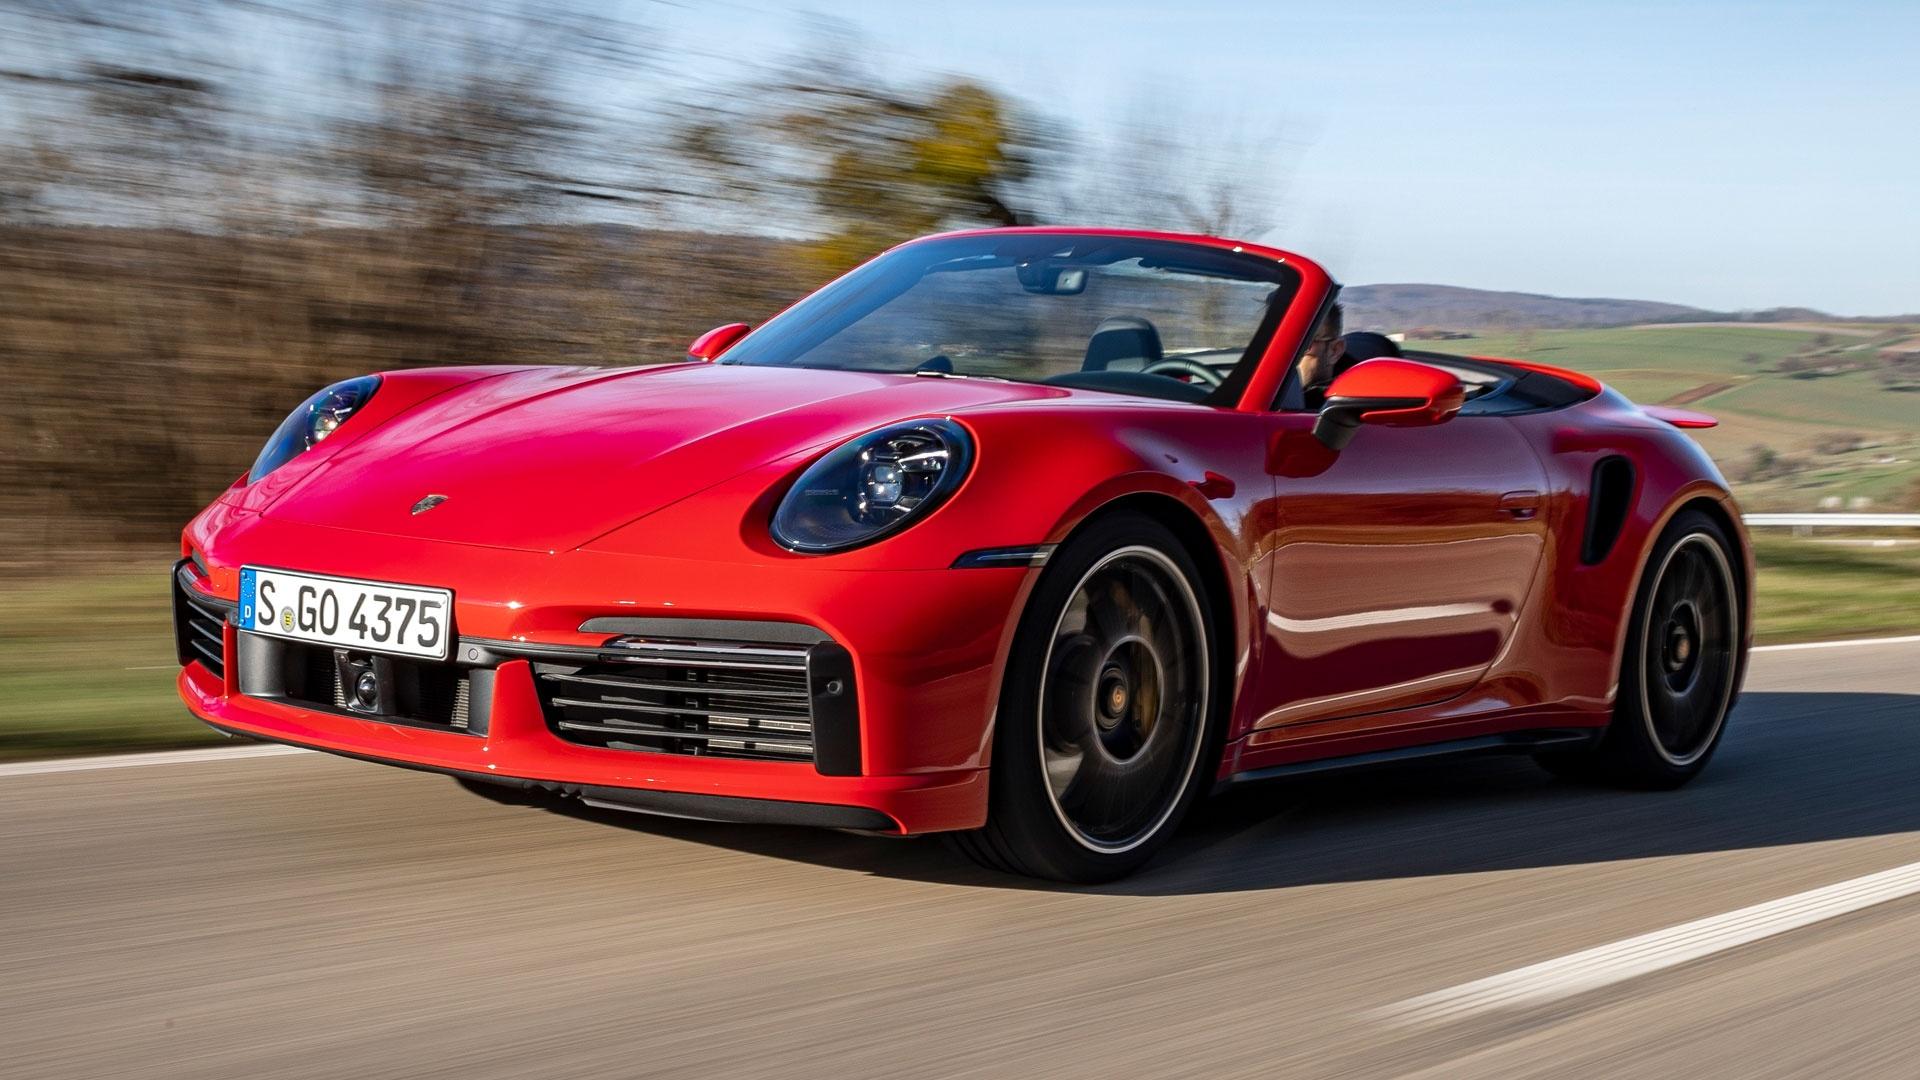 Porsche 911 to remain the last combustion model in the lineup. Details here